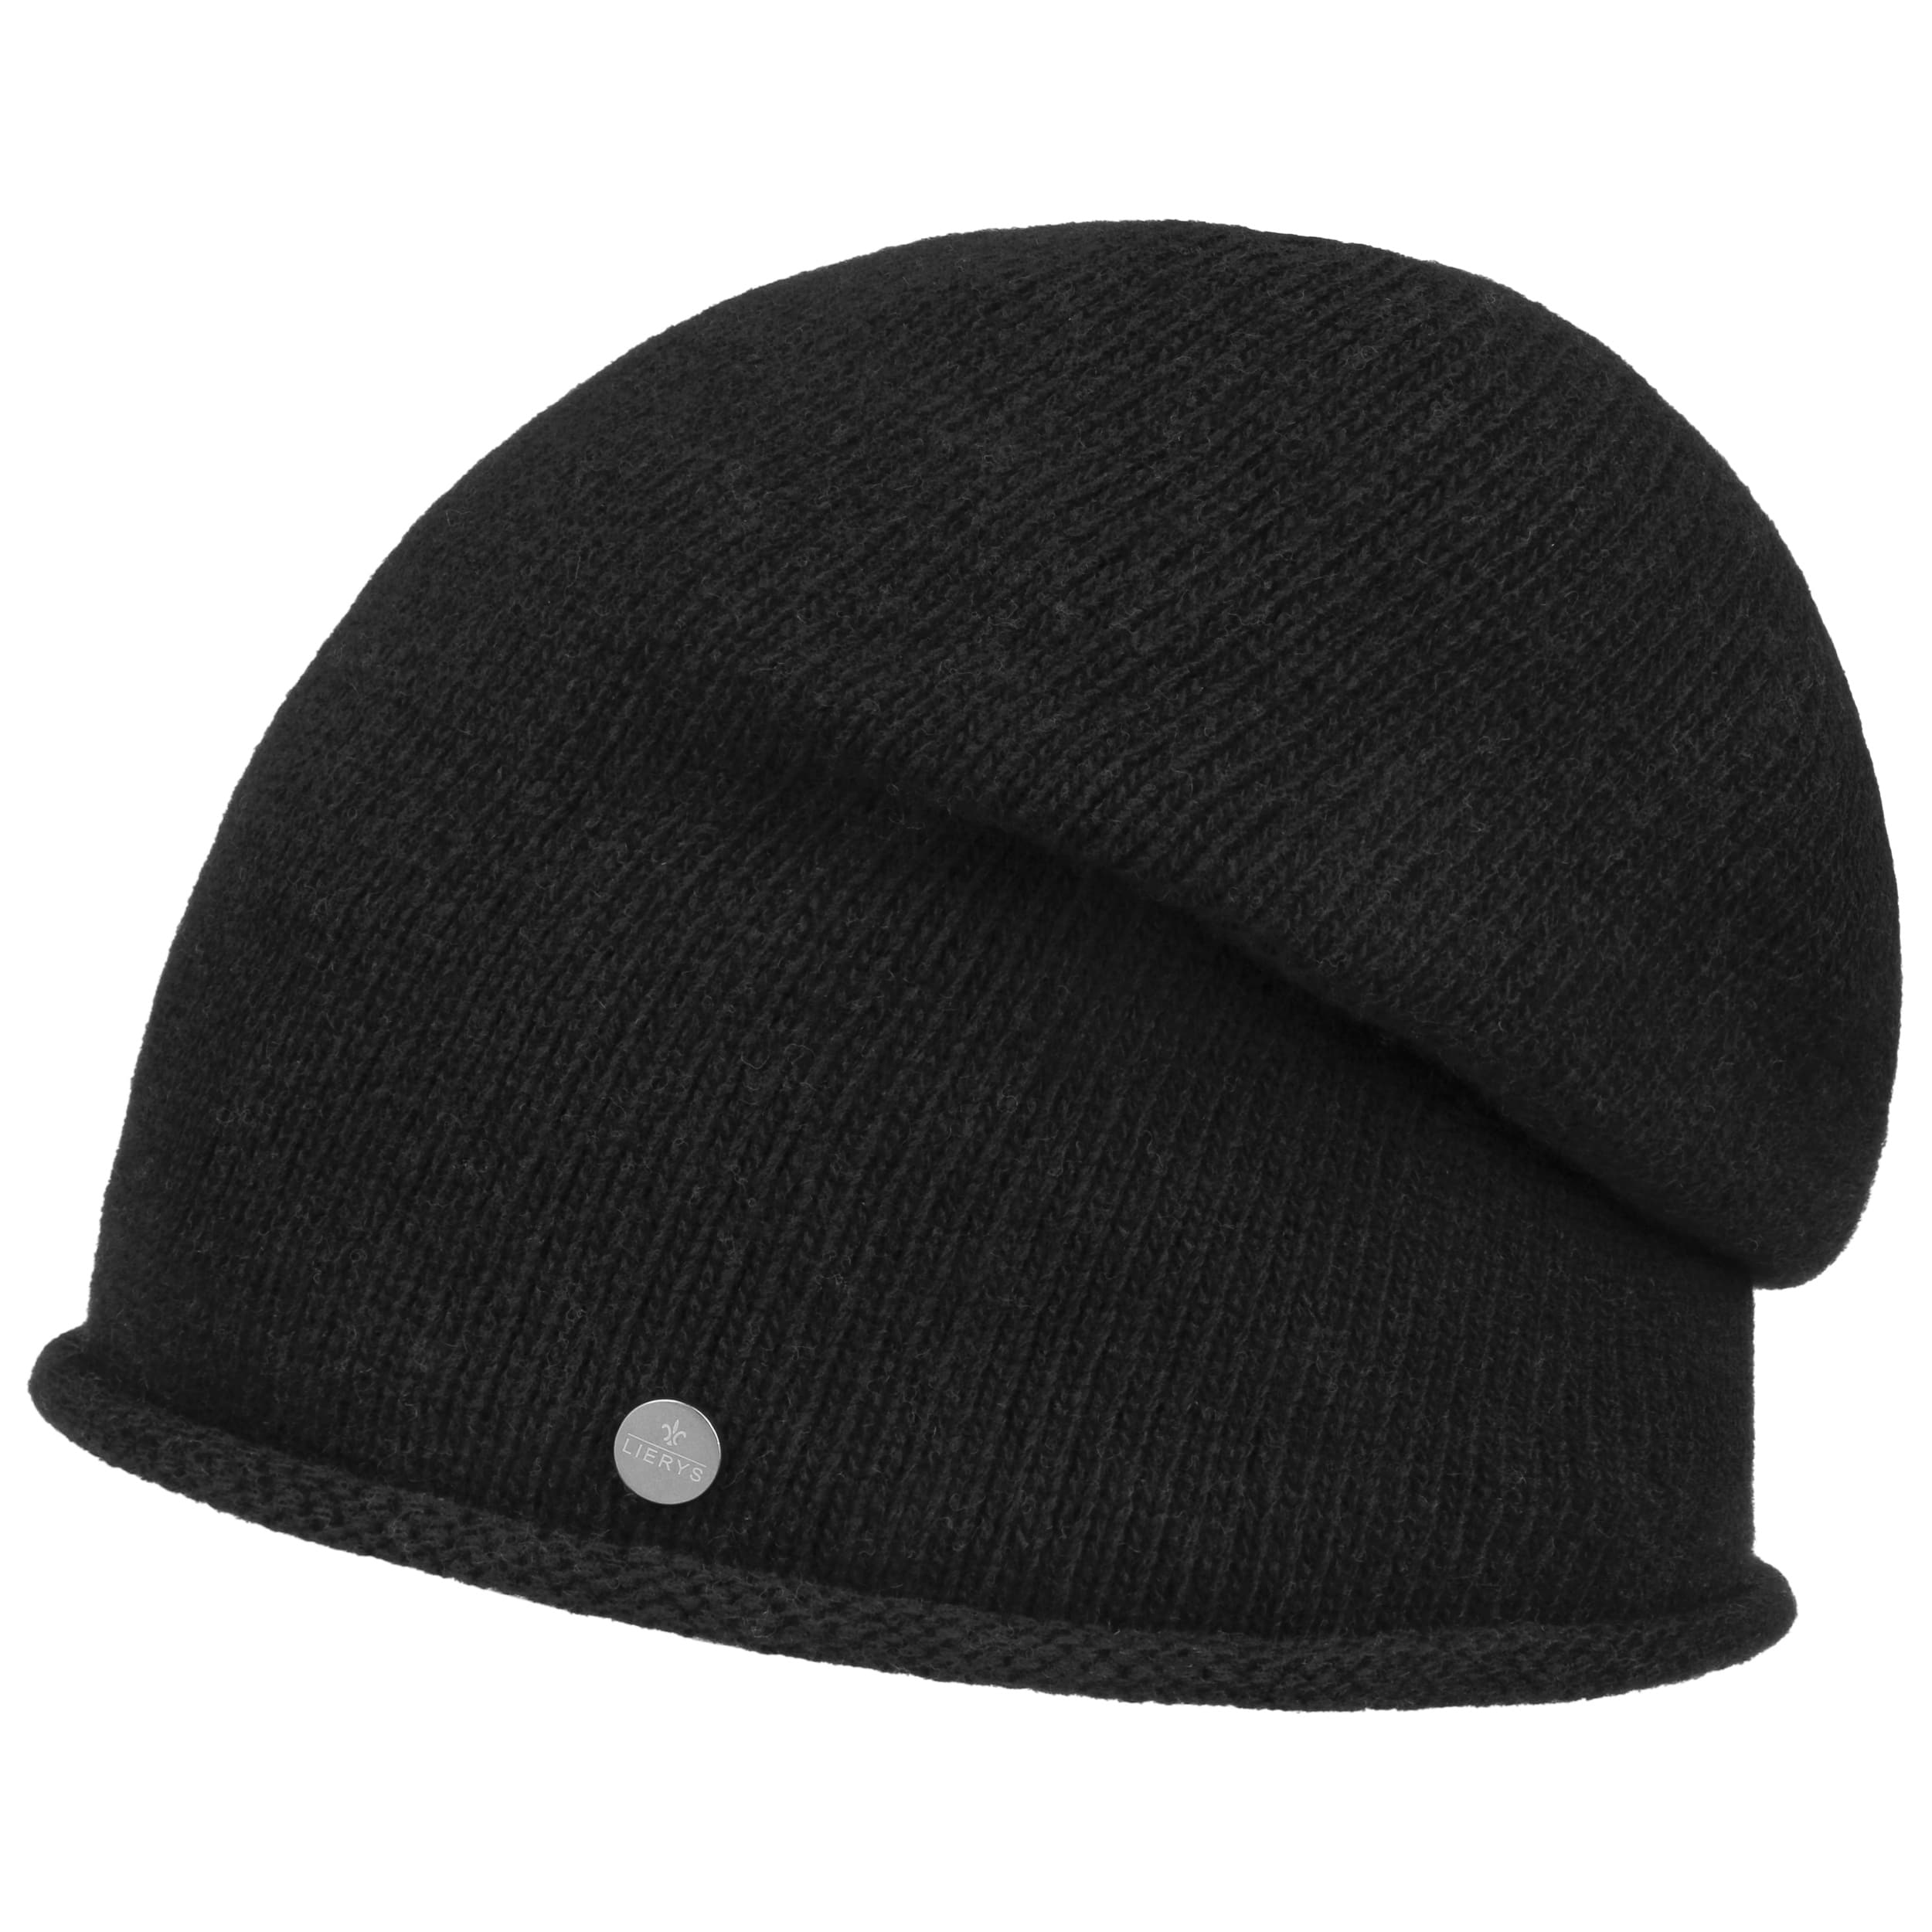 Hat Box by Lierys -->   High-quality Lierys hats, beanies & caps